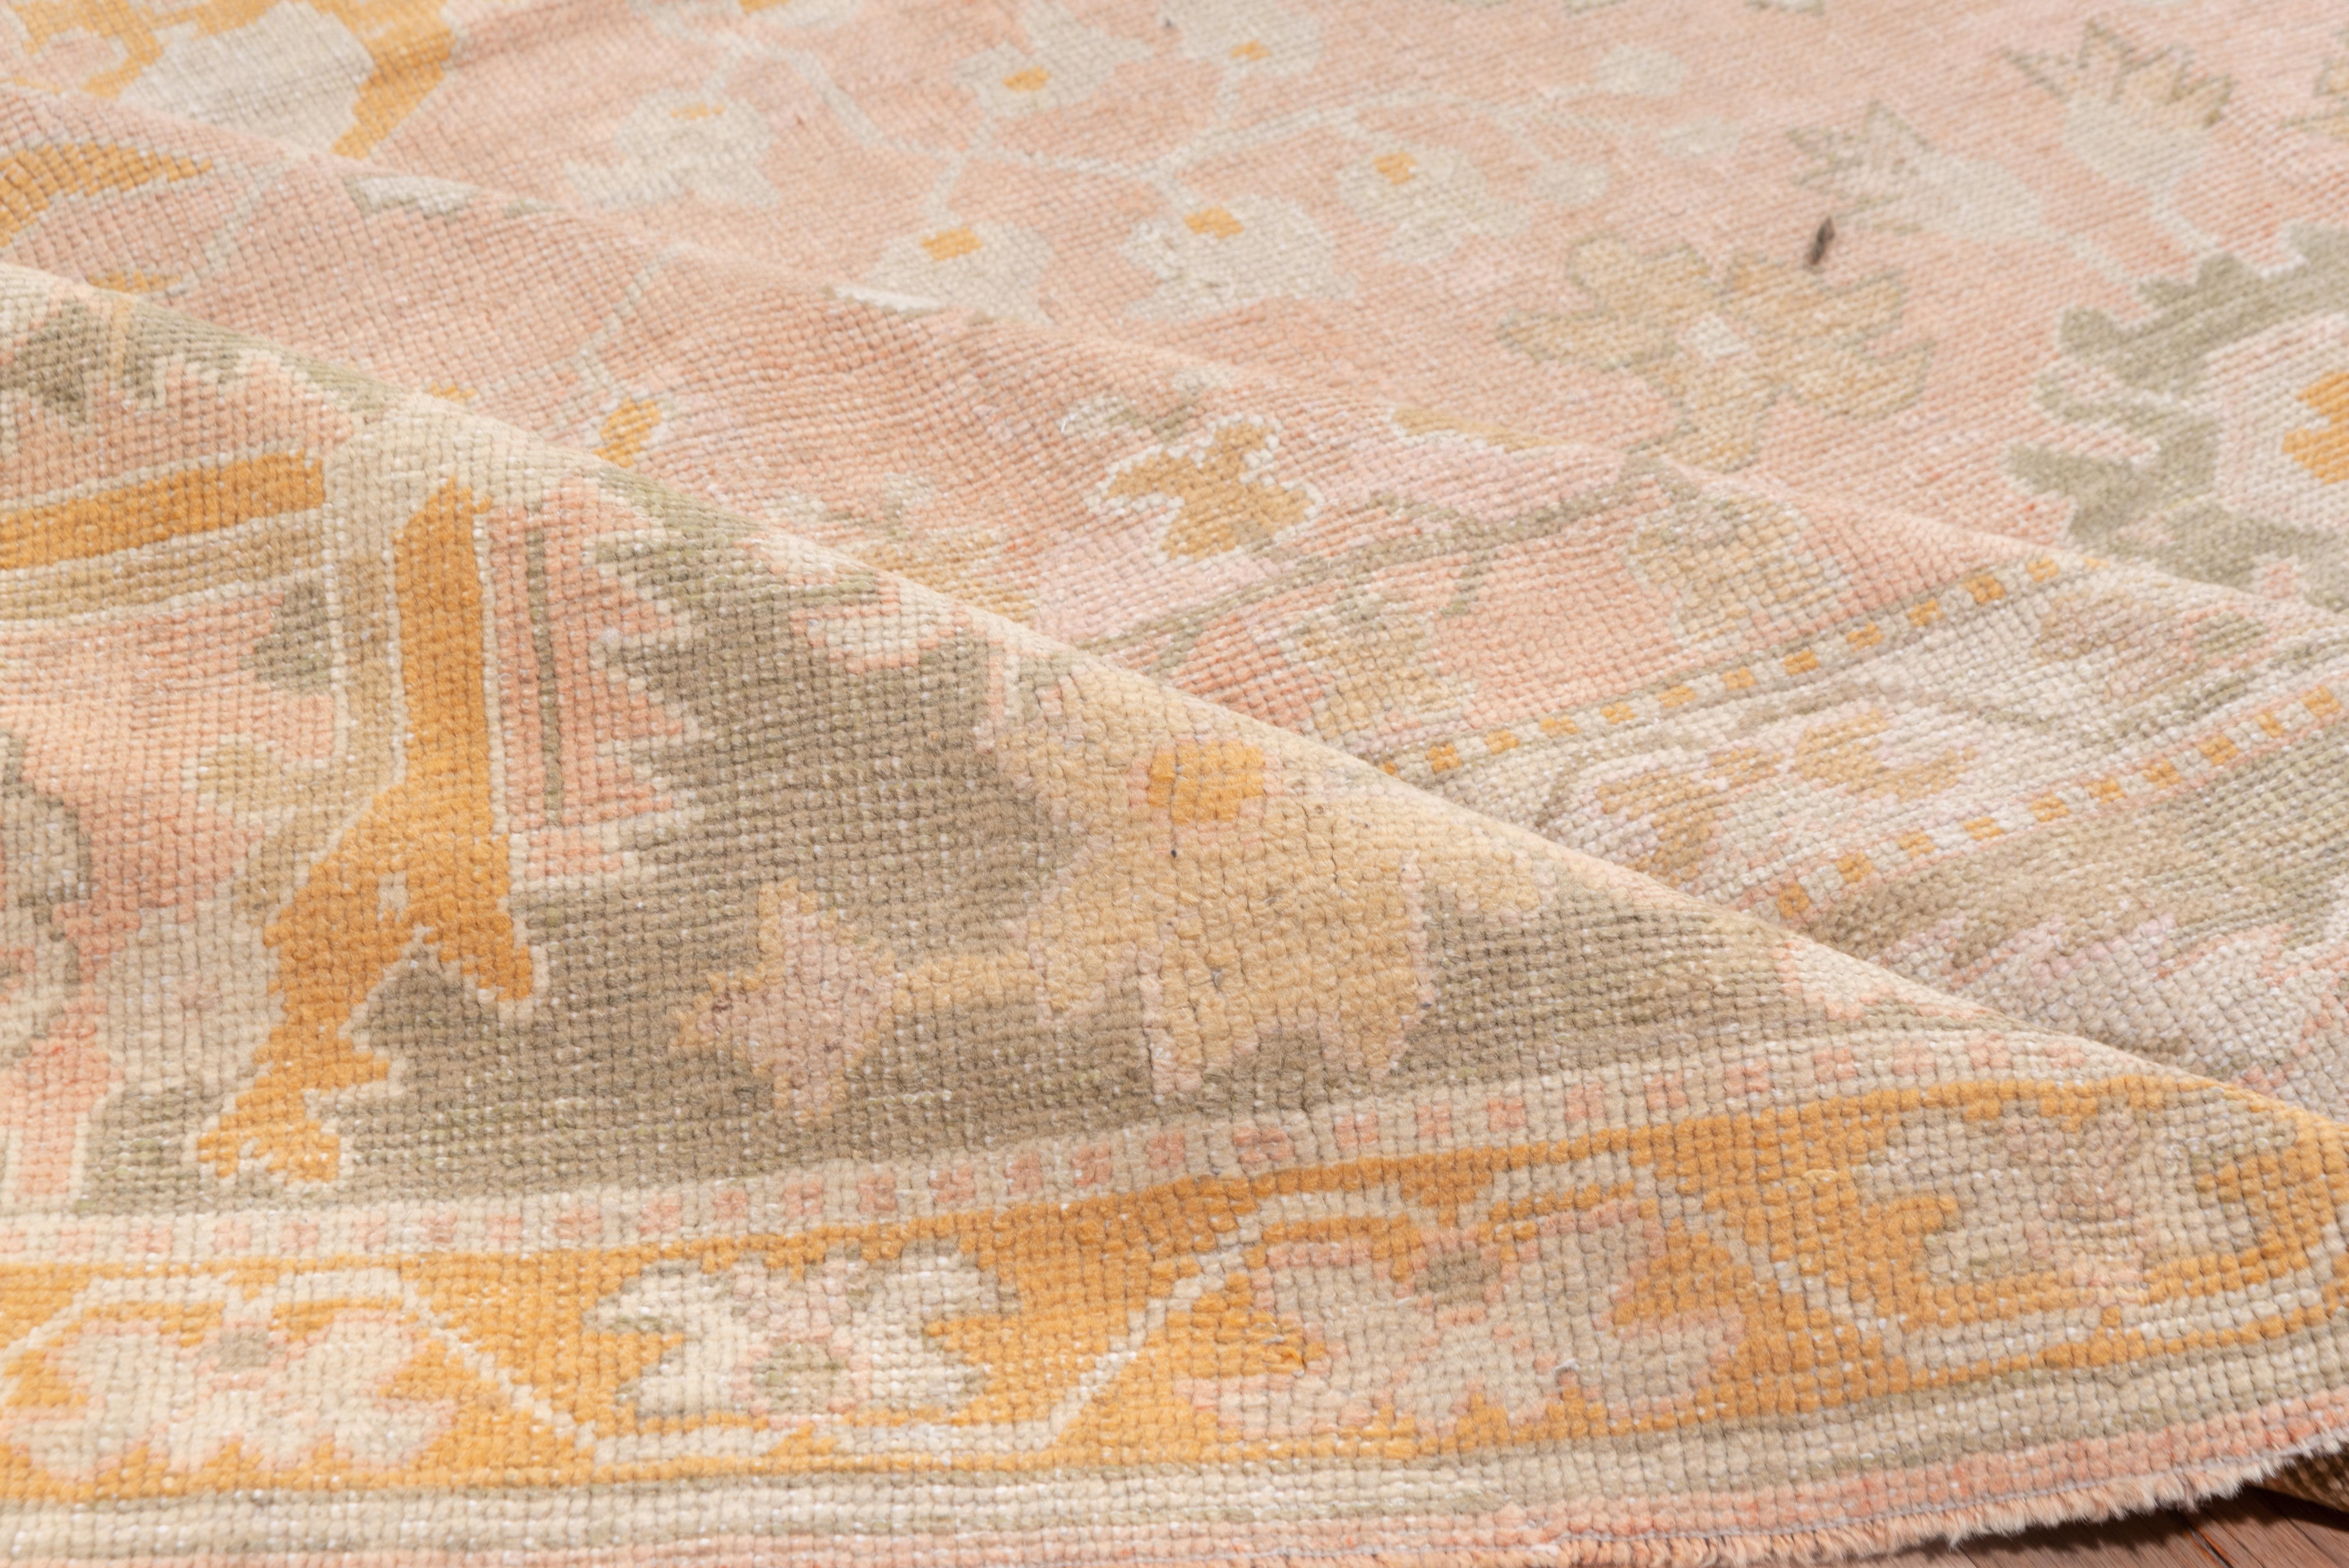 Hand-Knotted 1910s Gorgeous Antique Turkish Oushak Carpet, Pink Field, Green Orange Accents For Sale